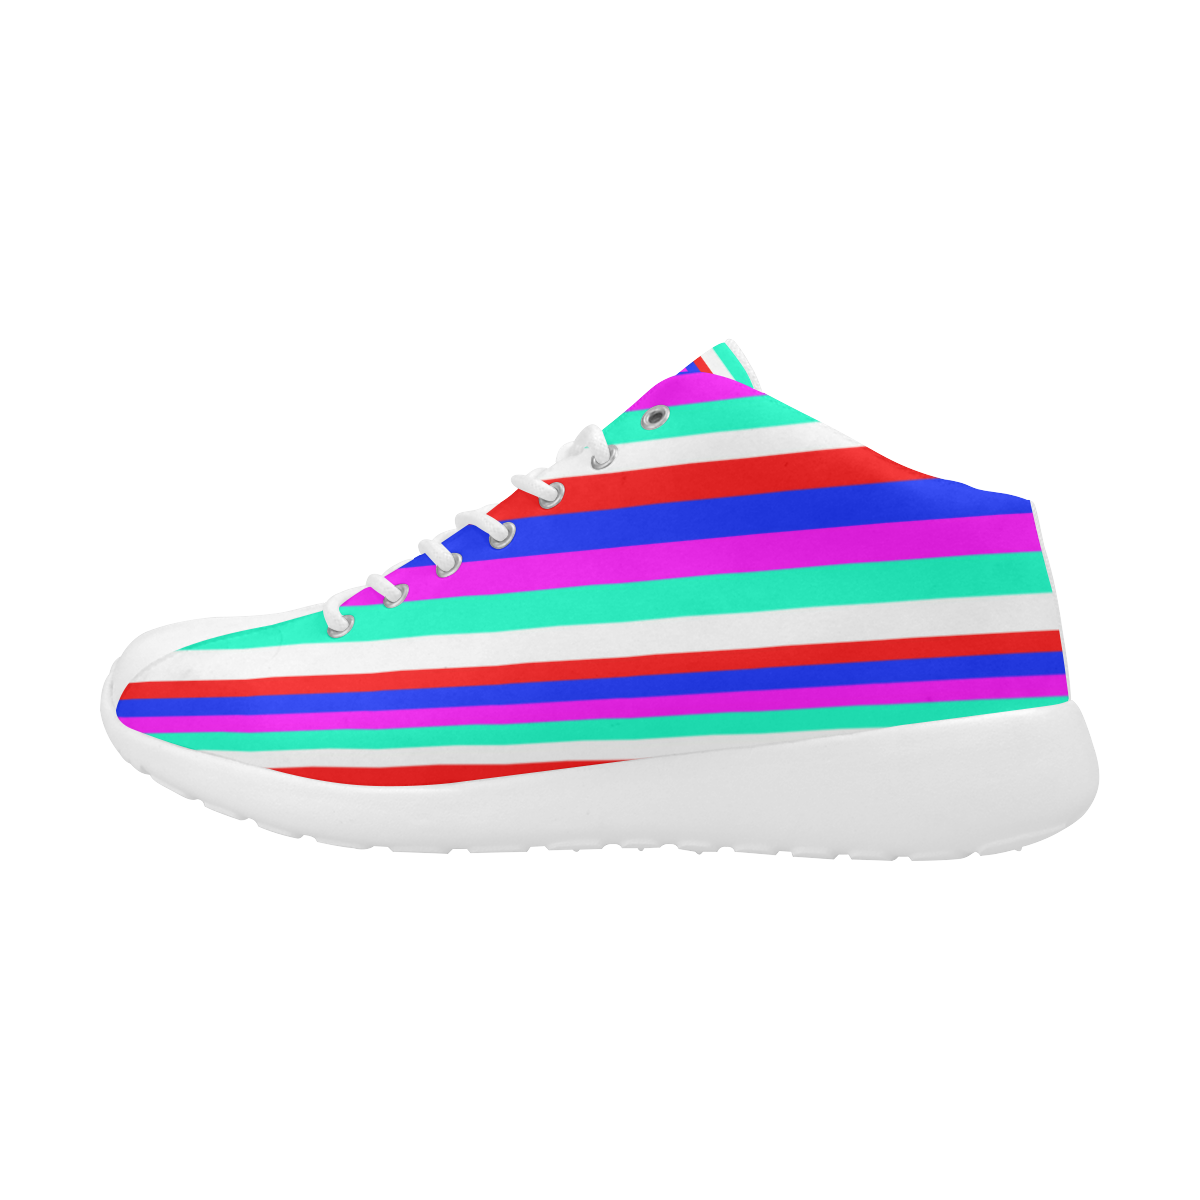 Colored Stripes - Fire Red Royal Blue Pink Mint Wh Women's Basketball Training Shoes (Model 47502)